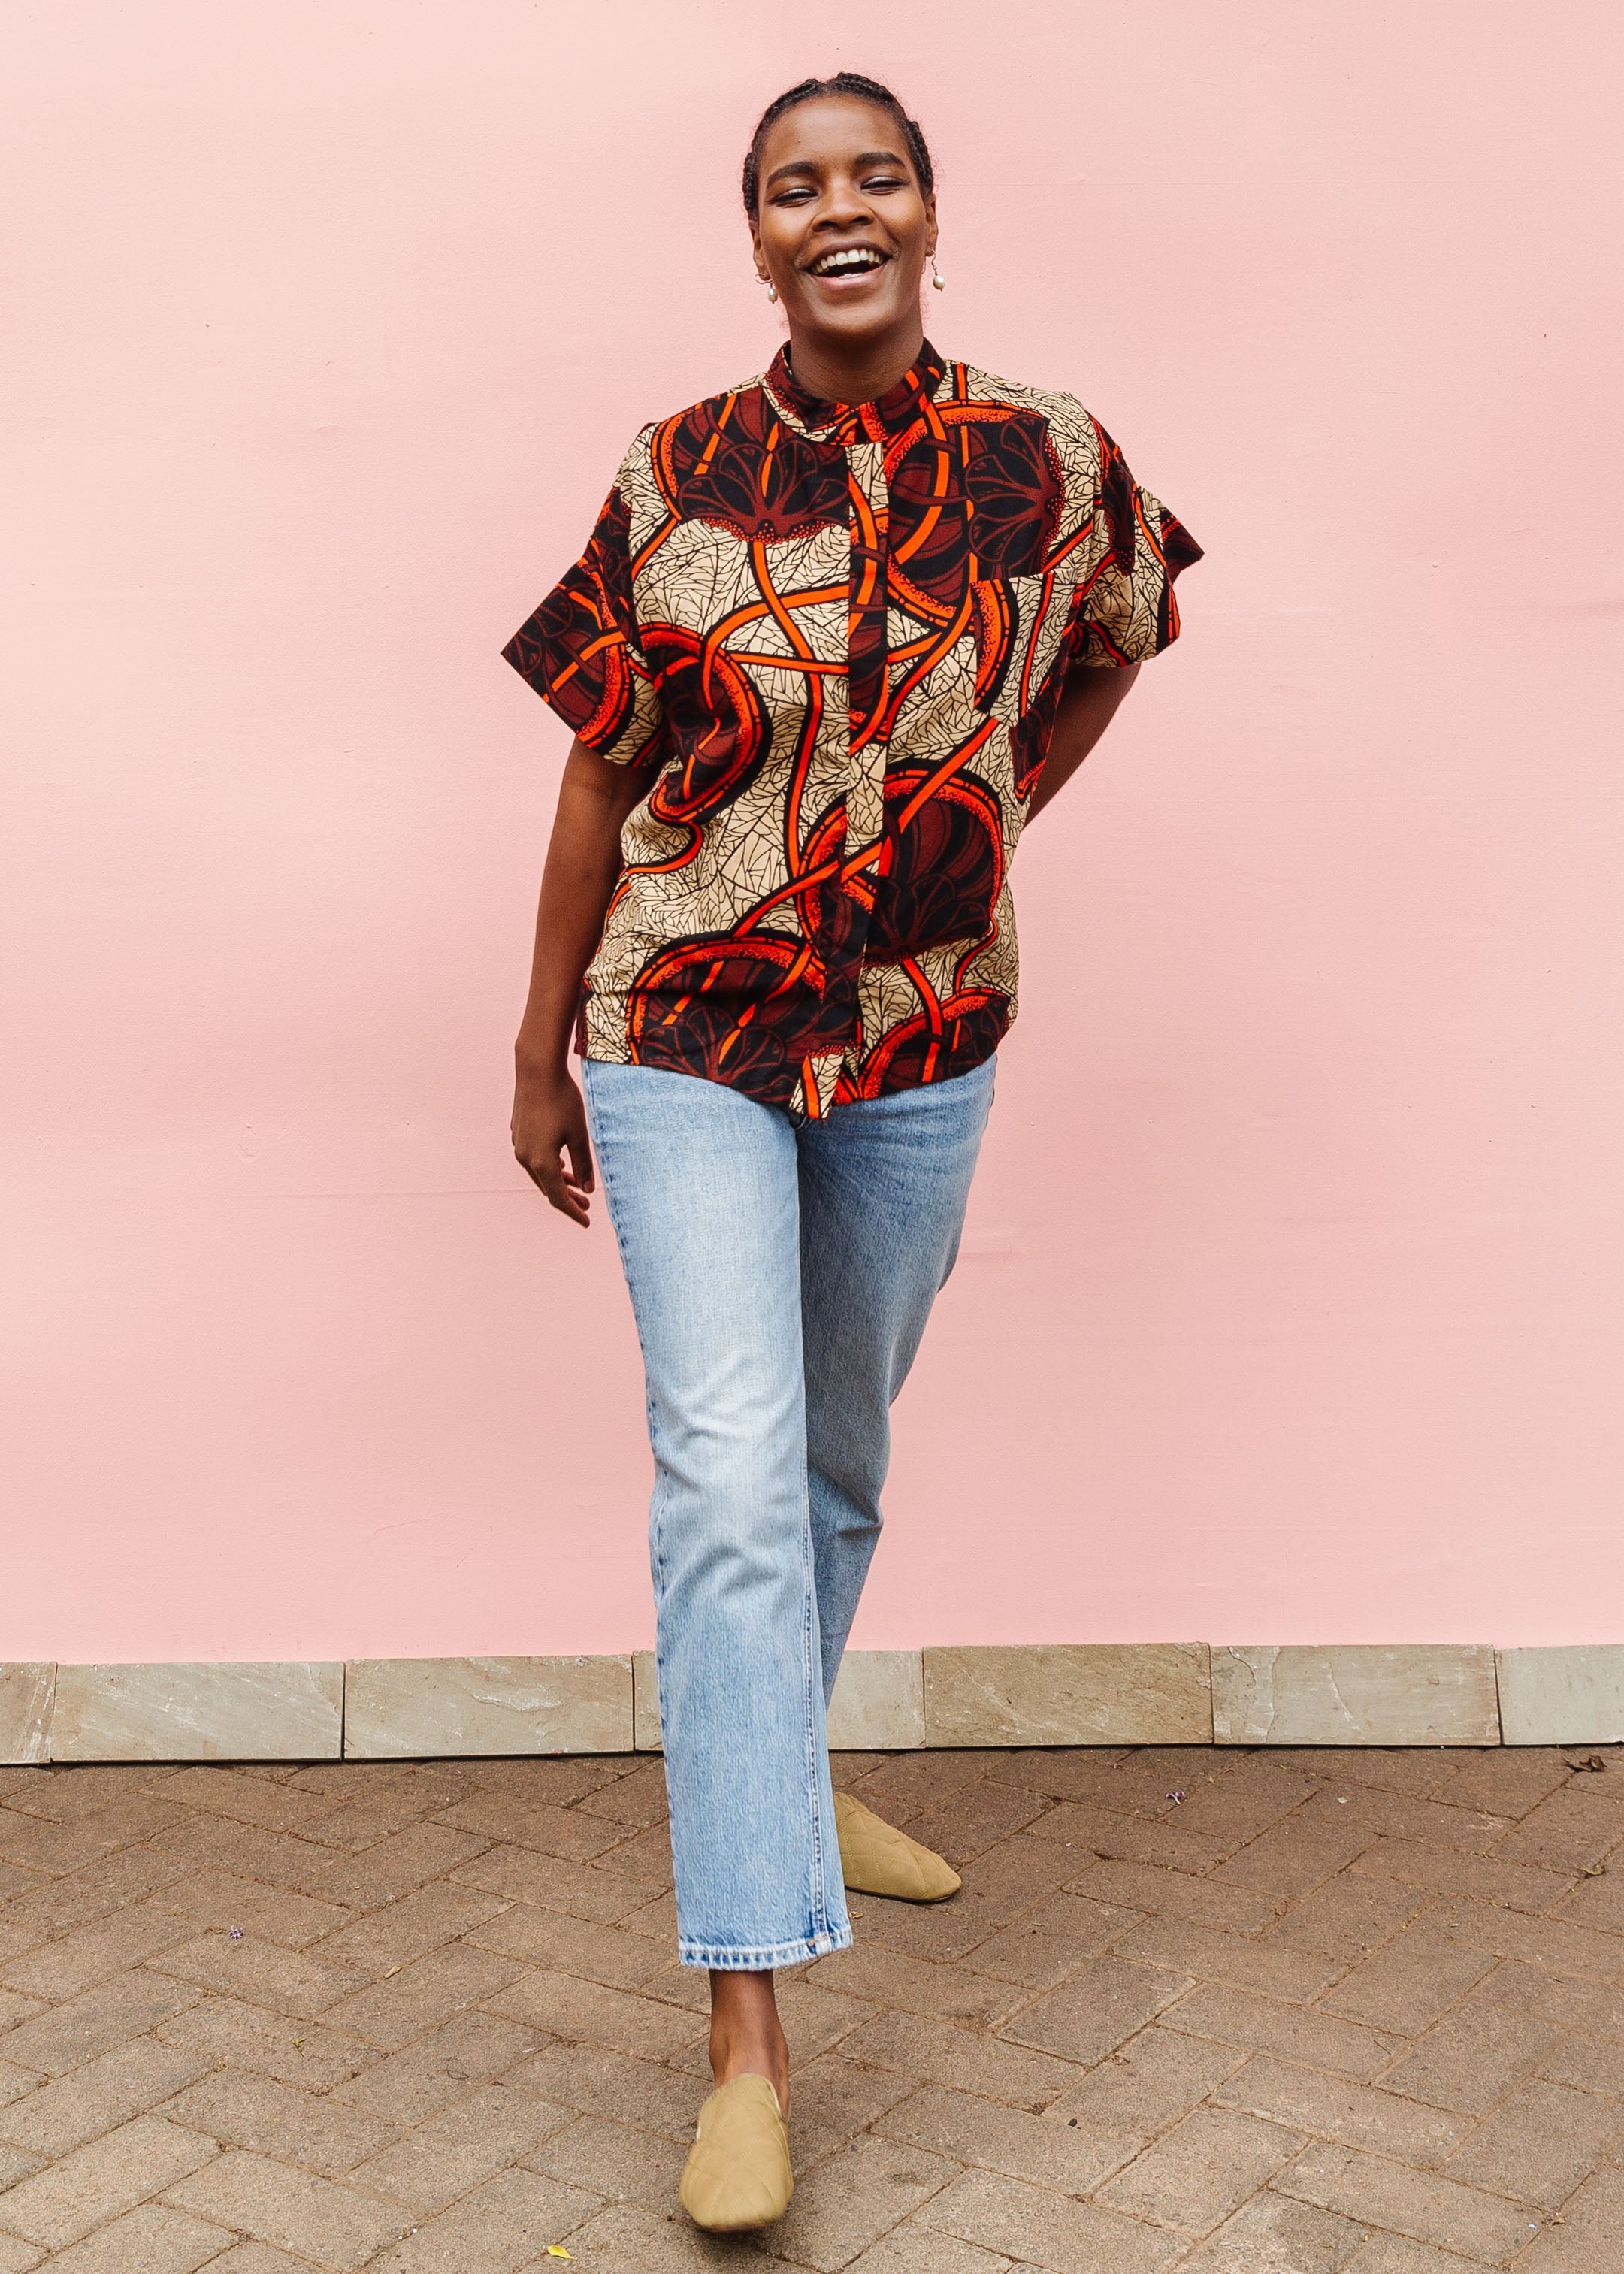 Model wearing beige shirt with brown and orange circles and lines.